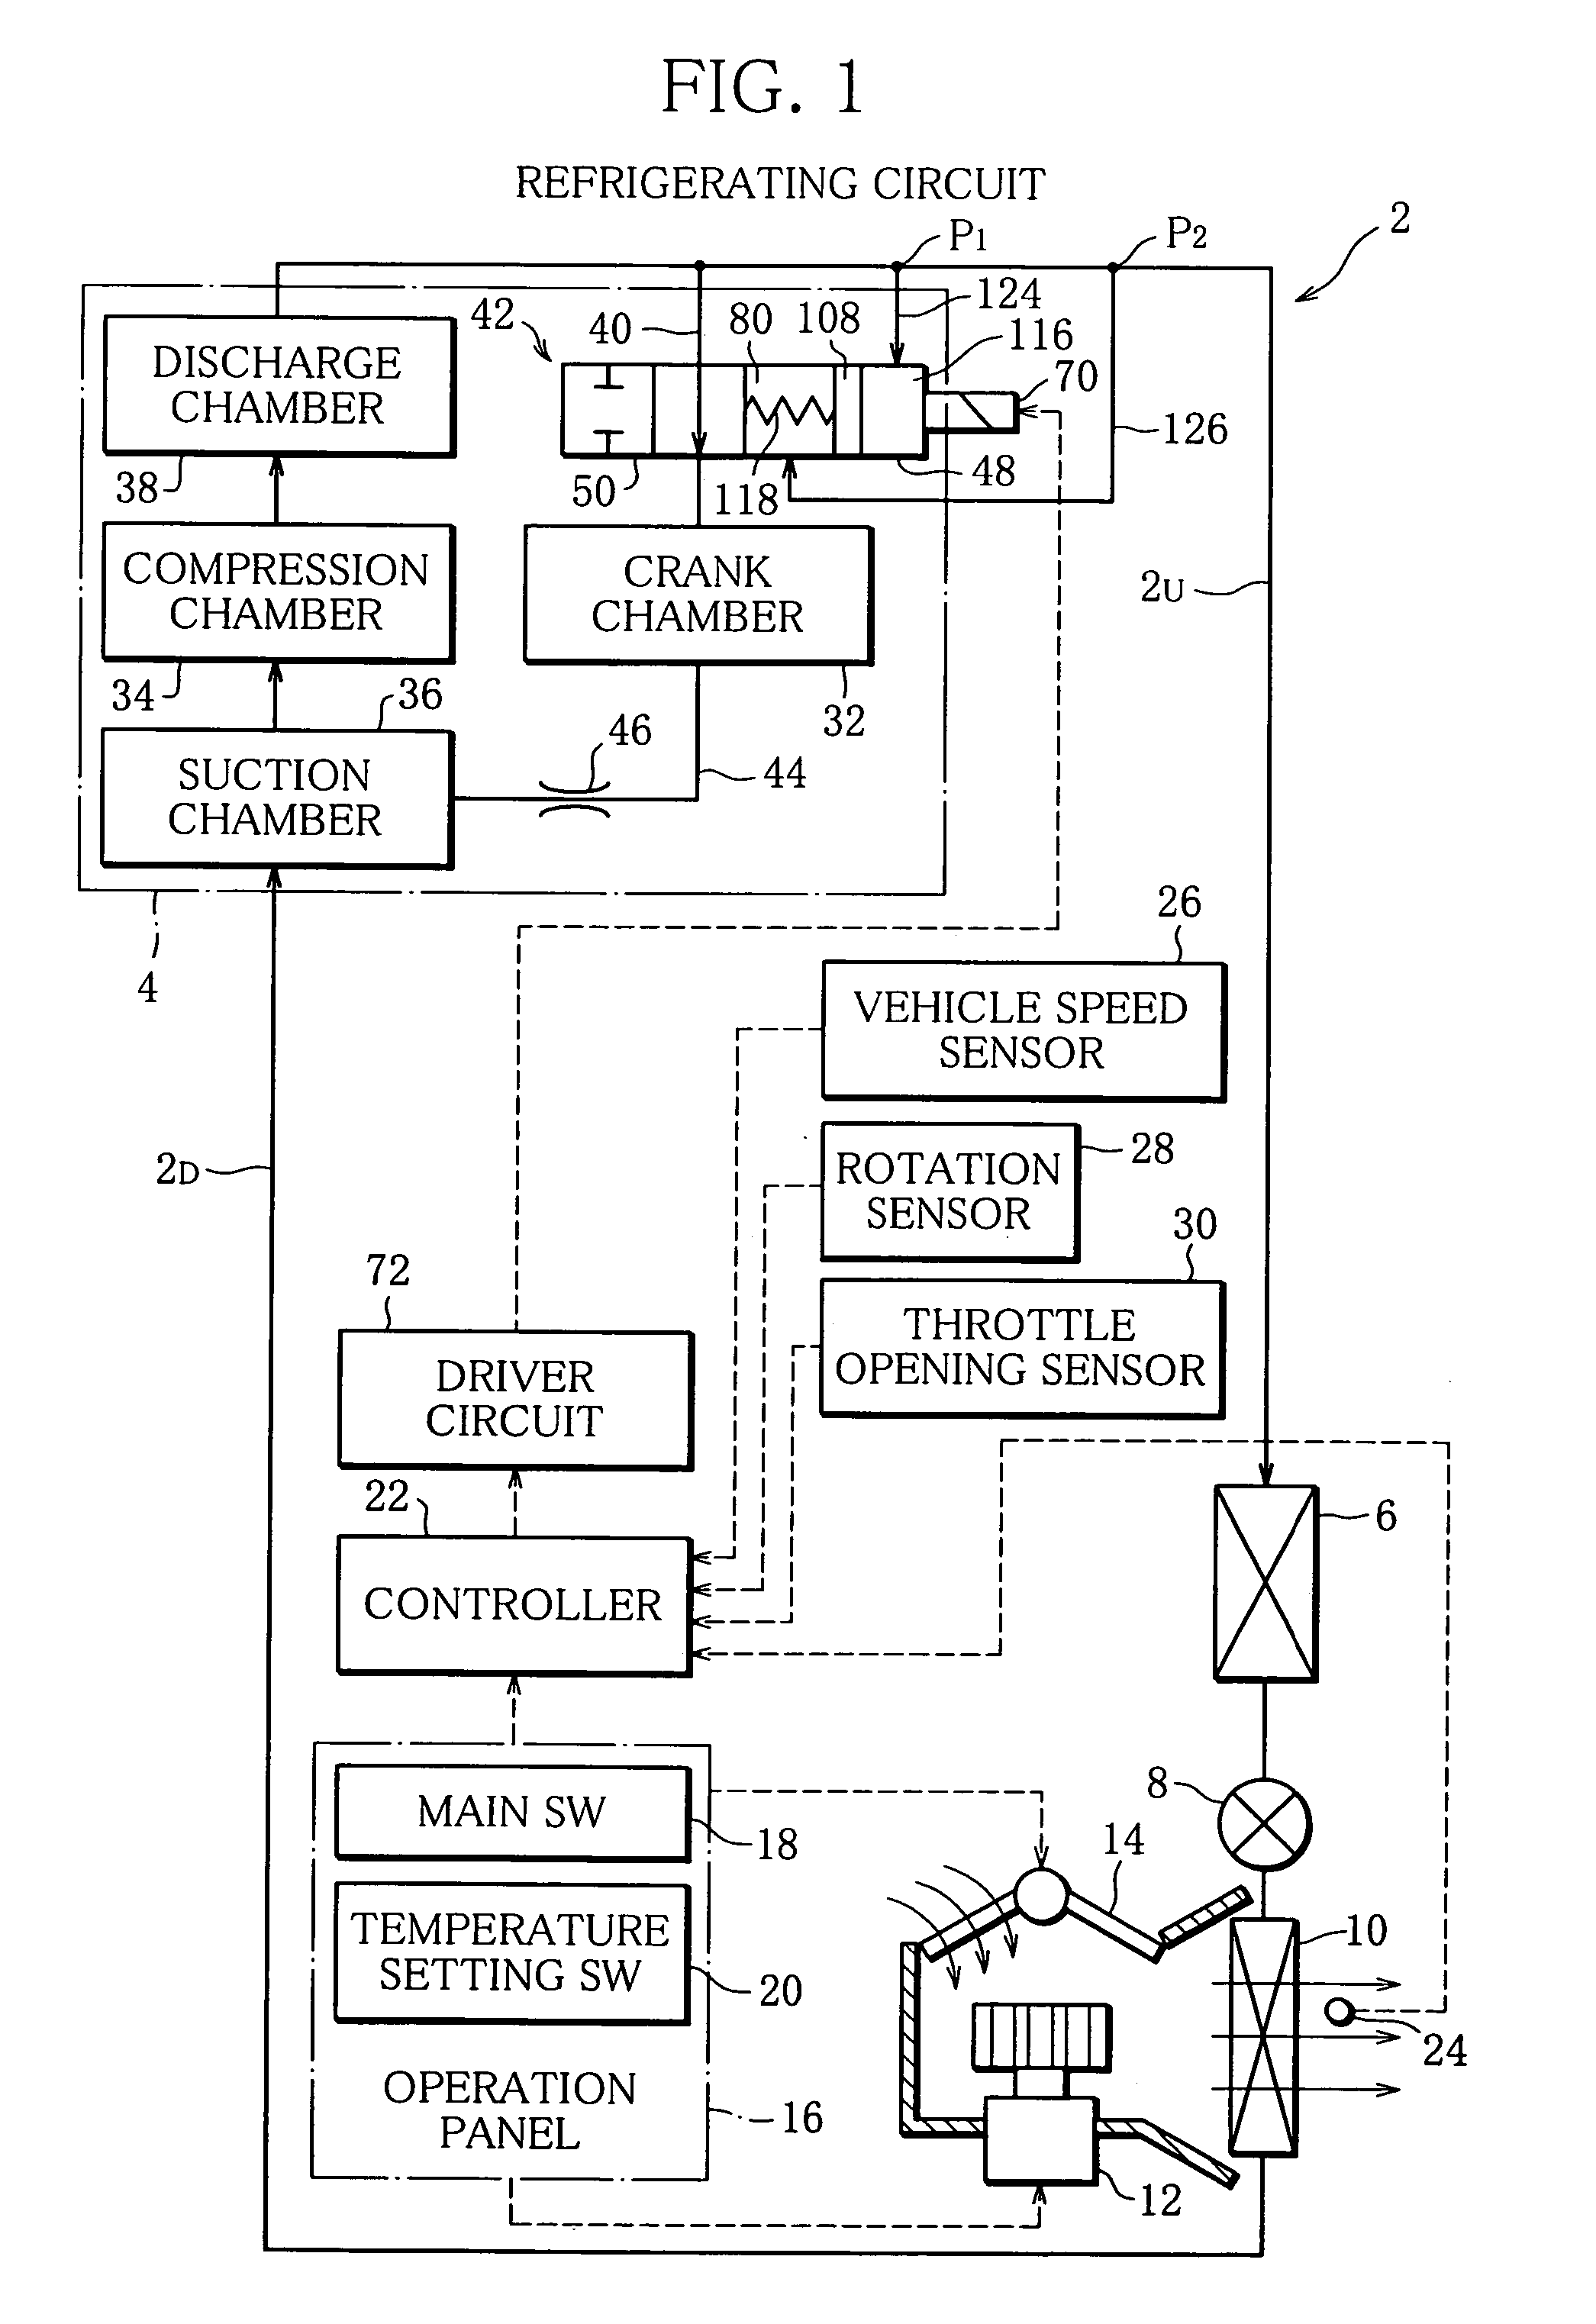 Control valve device for variable capacity type swash plate compressor